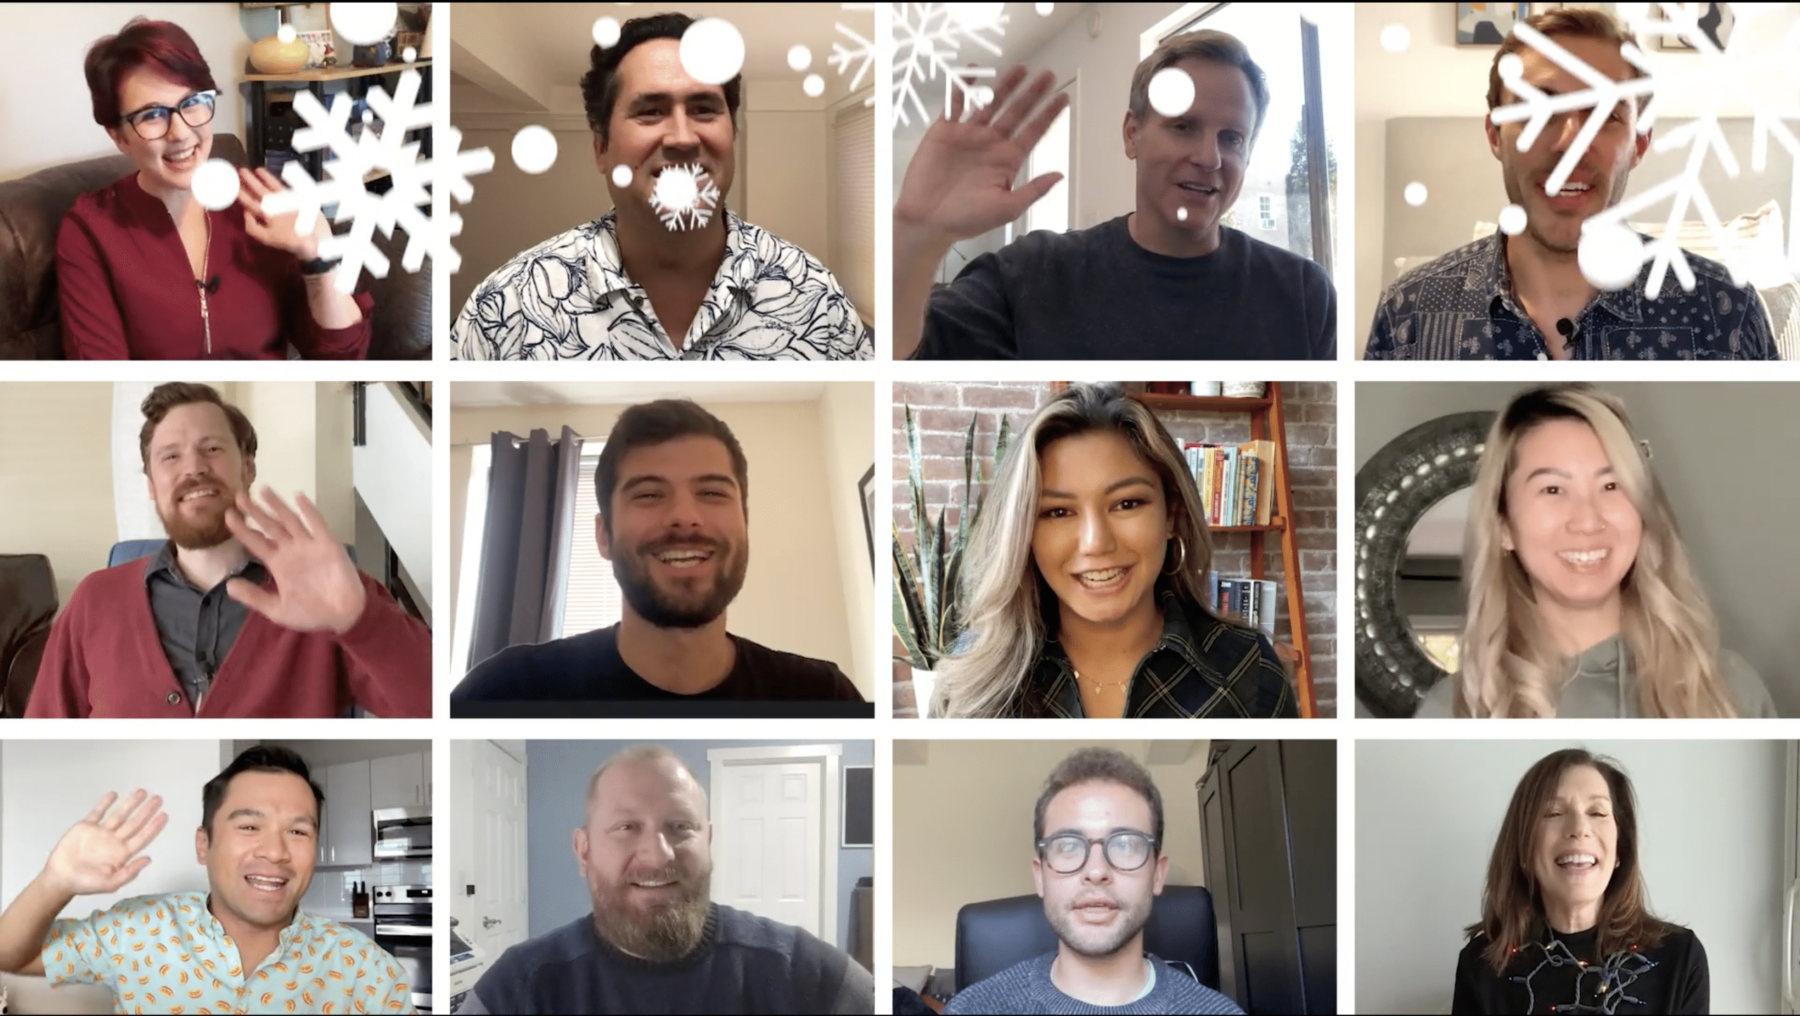 Thank customers in your holiday video message